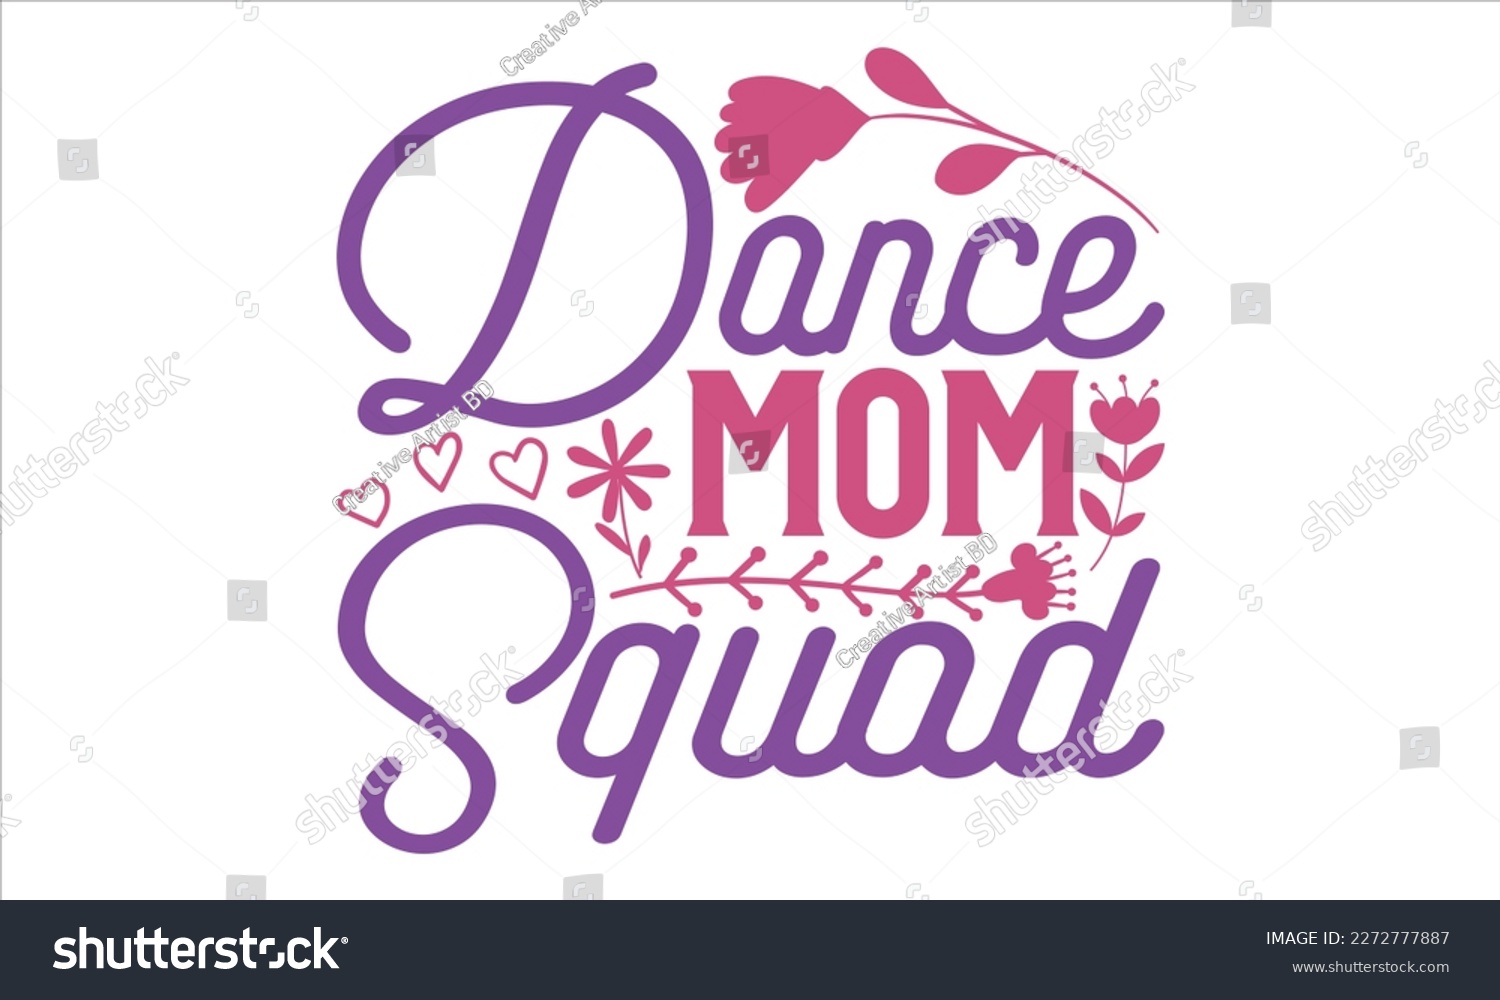 SVG of Dance Mom Squad - Mother’s Day T shirt Design, Vector illustration with hand draw lettering, Conceptual handwritten phrase calligraphic, svg for poster, banner, flyer and mug. svg